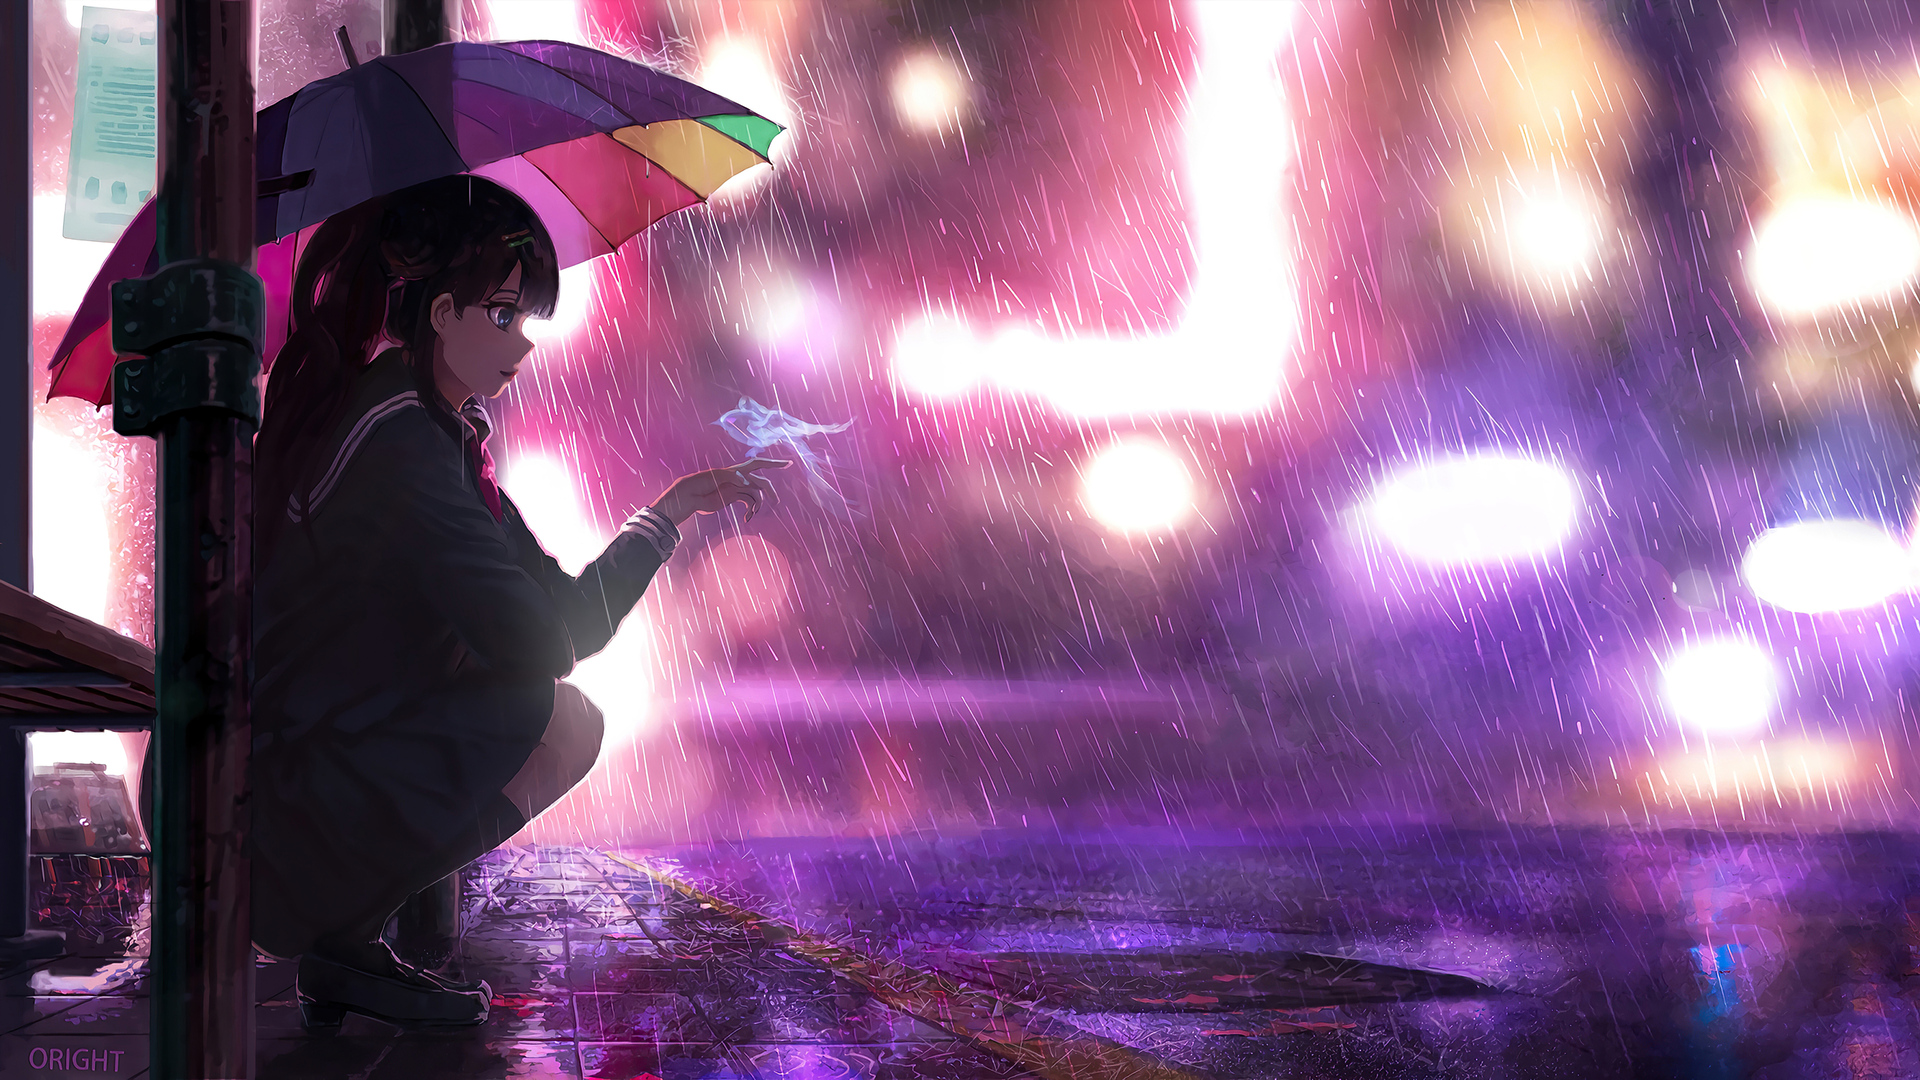 X umbrella rain anime girl k laptop full hd p hd k wallpapers images backgrounds photos and pictures